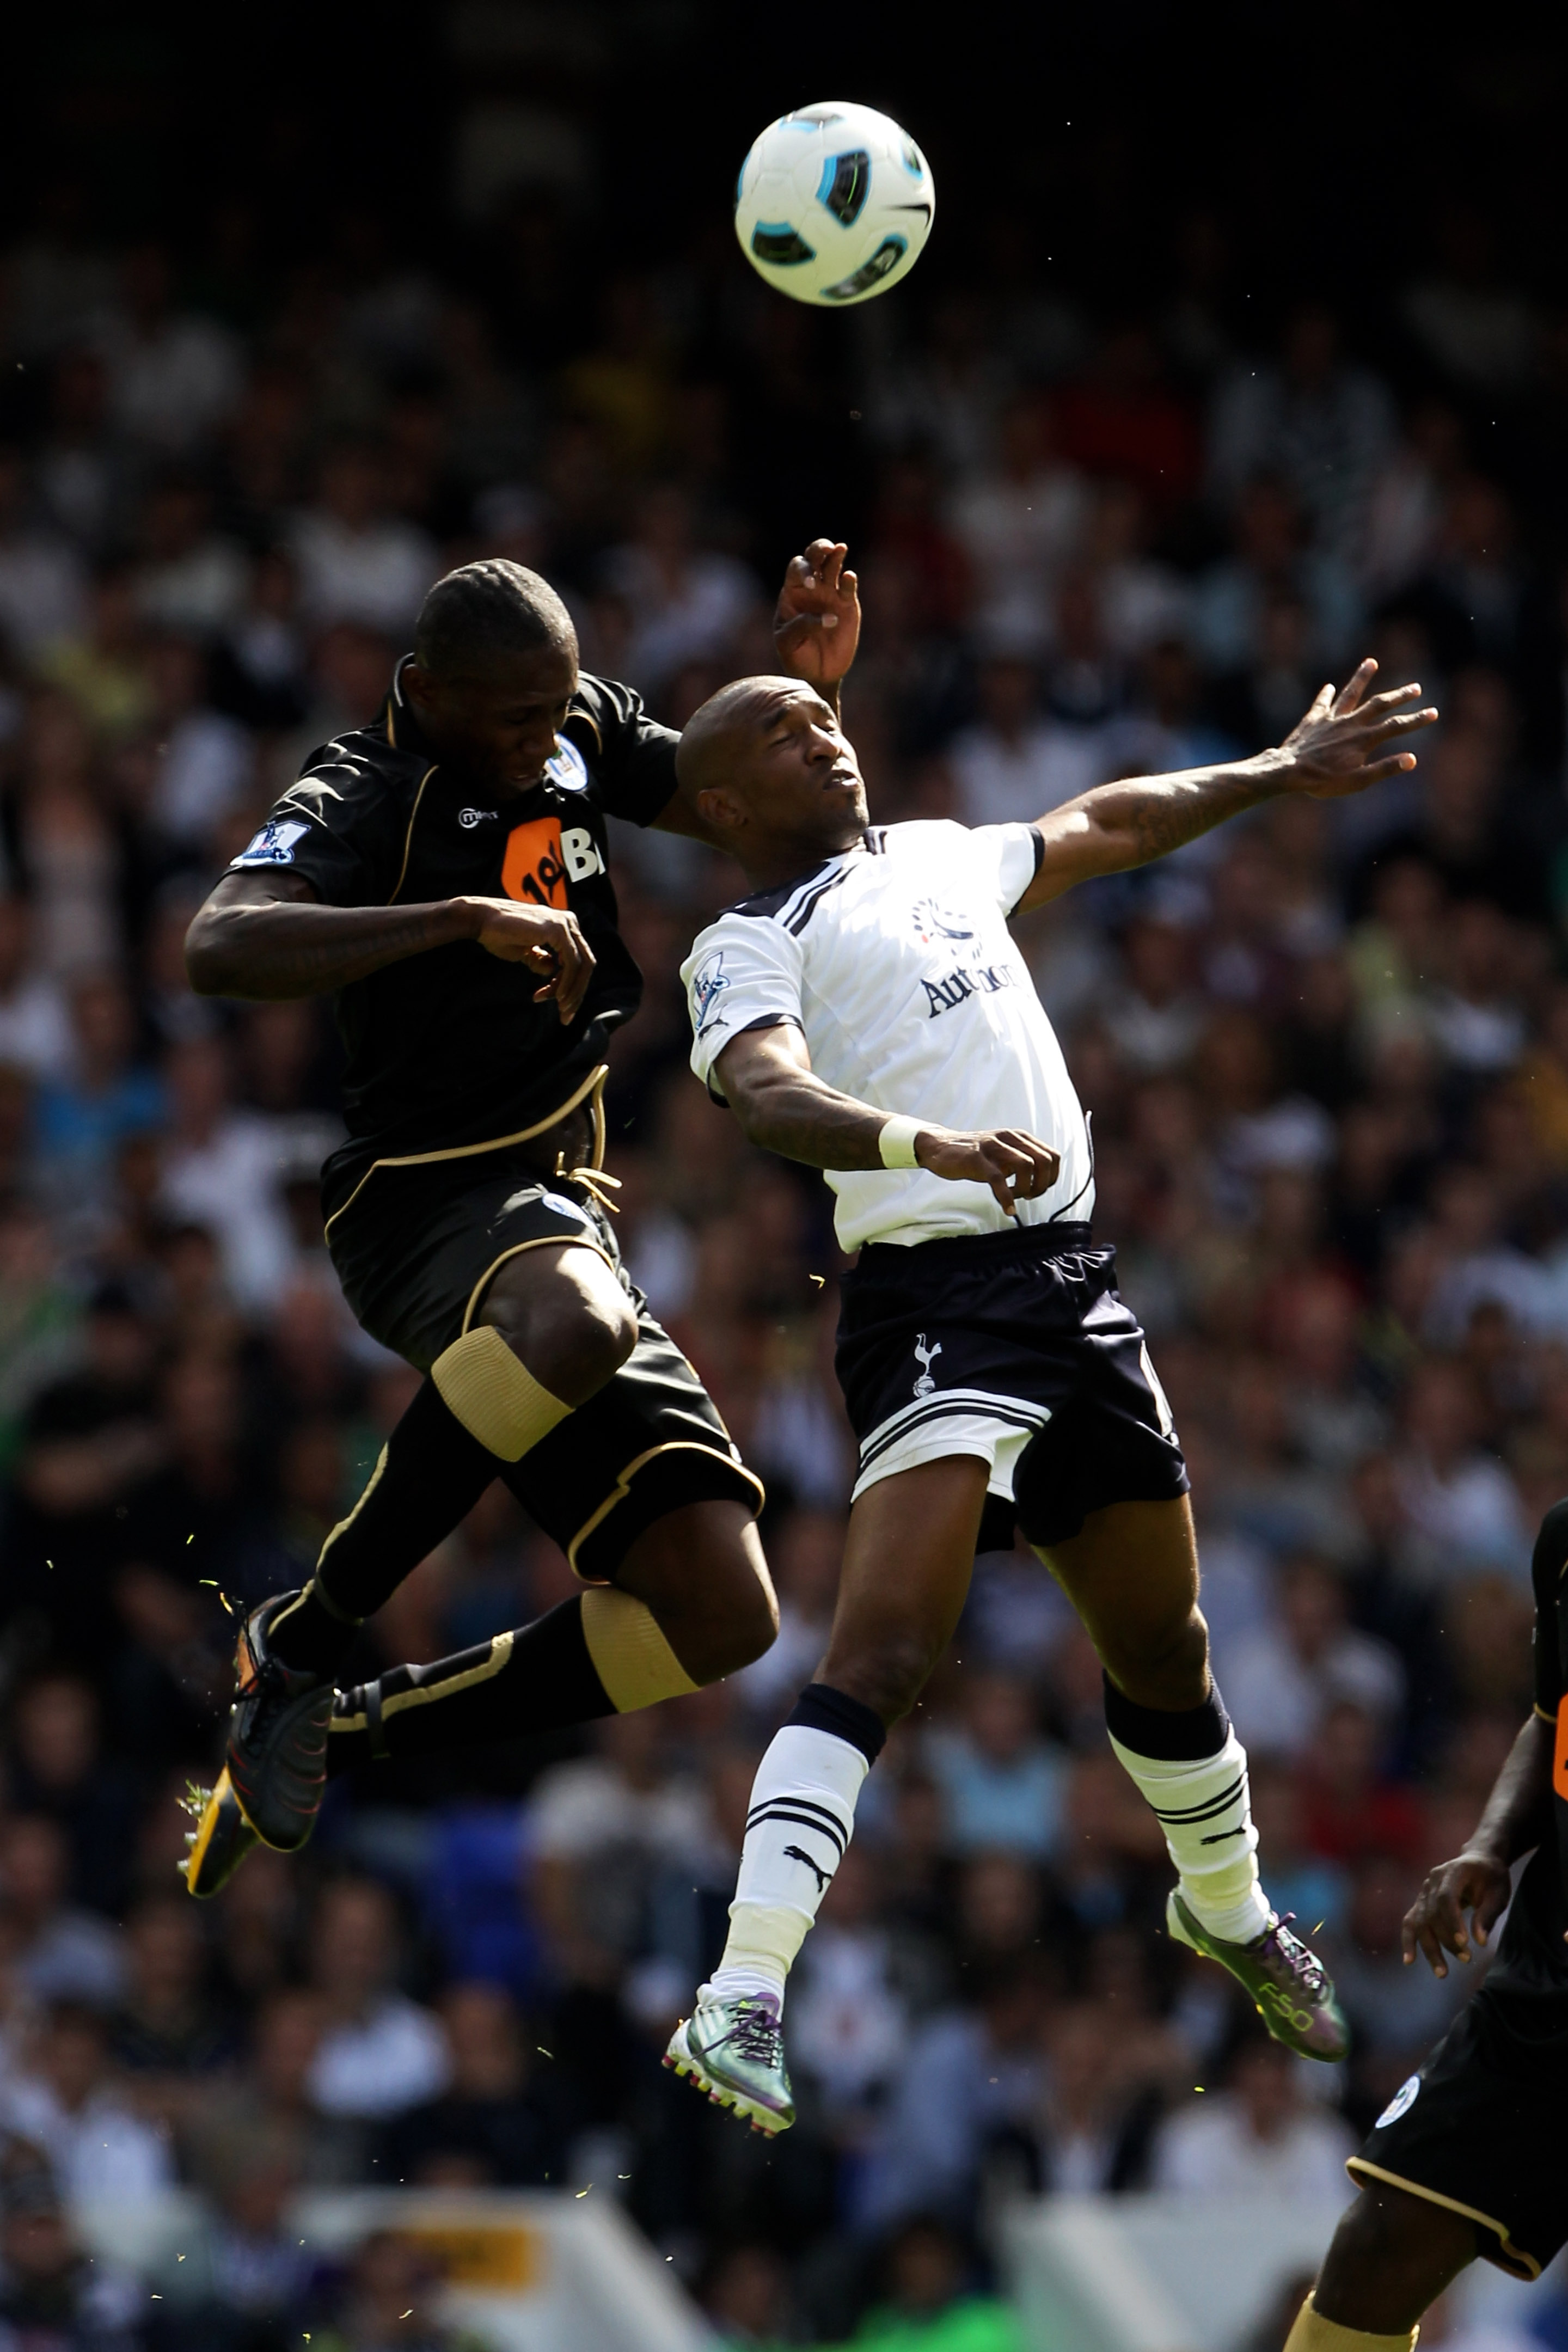 LONDON, ENGLAND - AUGUST 28:  Jermain Defoe of Tottenham battles for the header with Steve Gohouri of Wigan during the Barclays Premier League match between Tottenham Hotspur and Wigan Athletic at White Hart Lane on August 28, 2010 in London, England.  (P